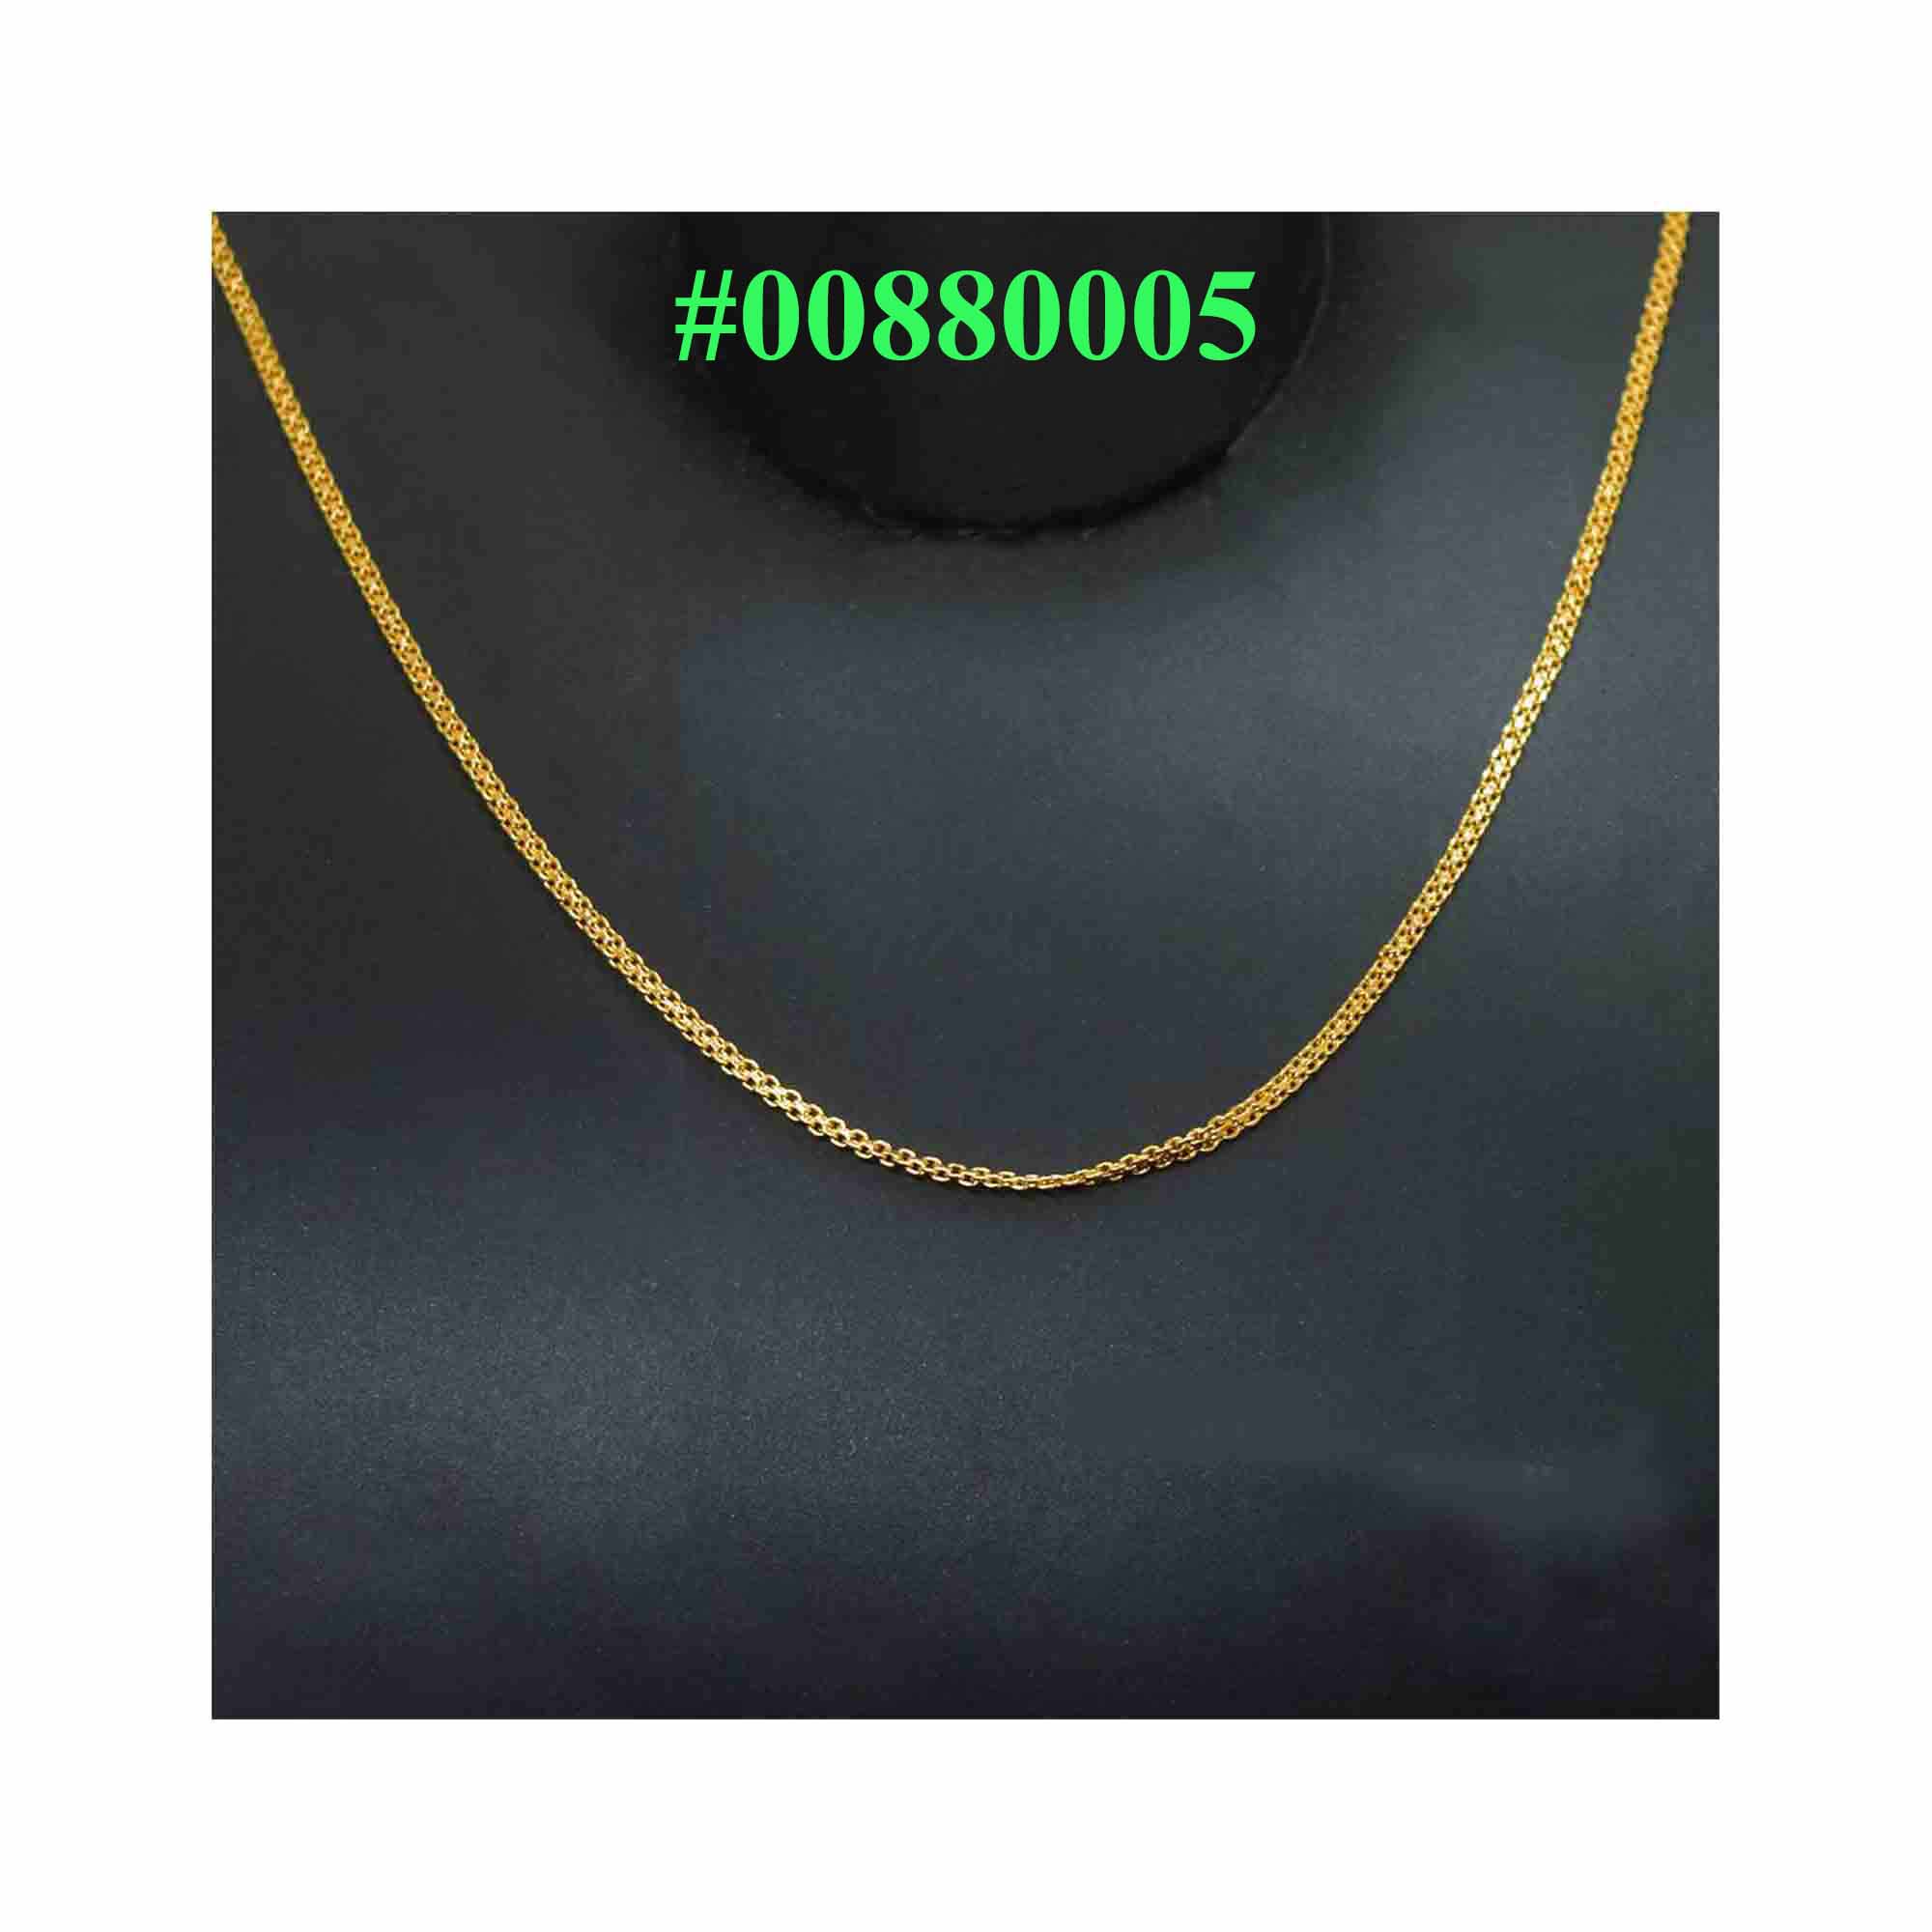 22K Gold plated Thin 02MM Bismark chain for ladies 18/24 Inch_#088 from nowbuy.lk Necklaces NowBuy.lk 2